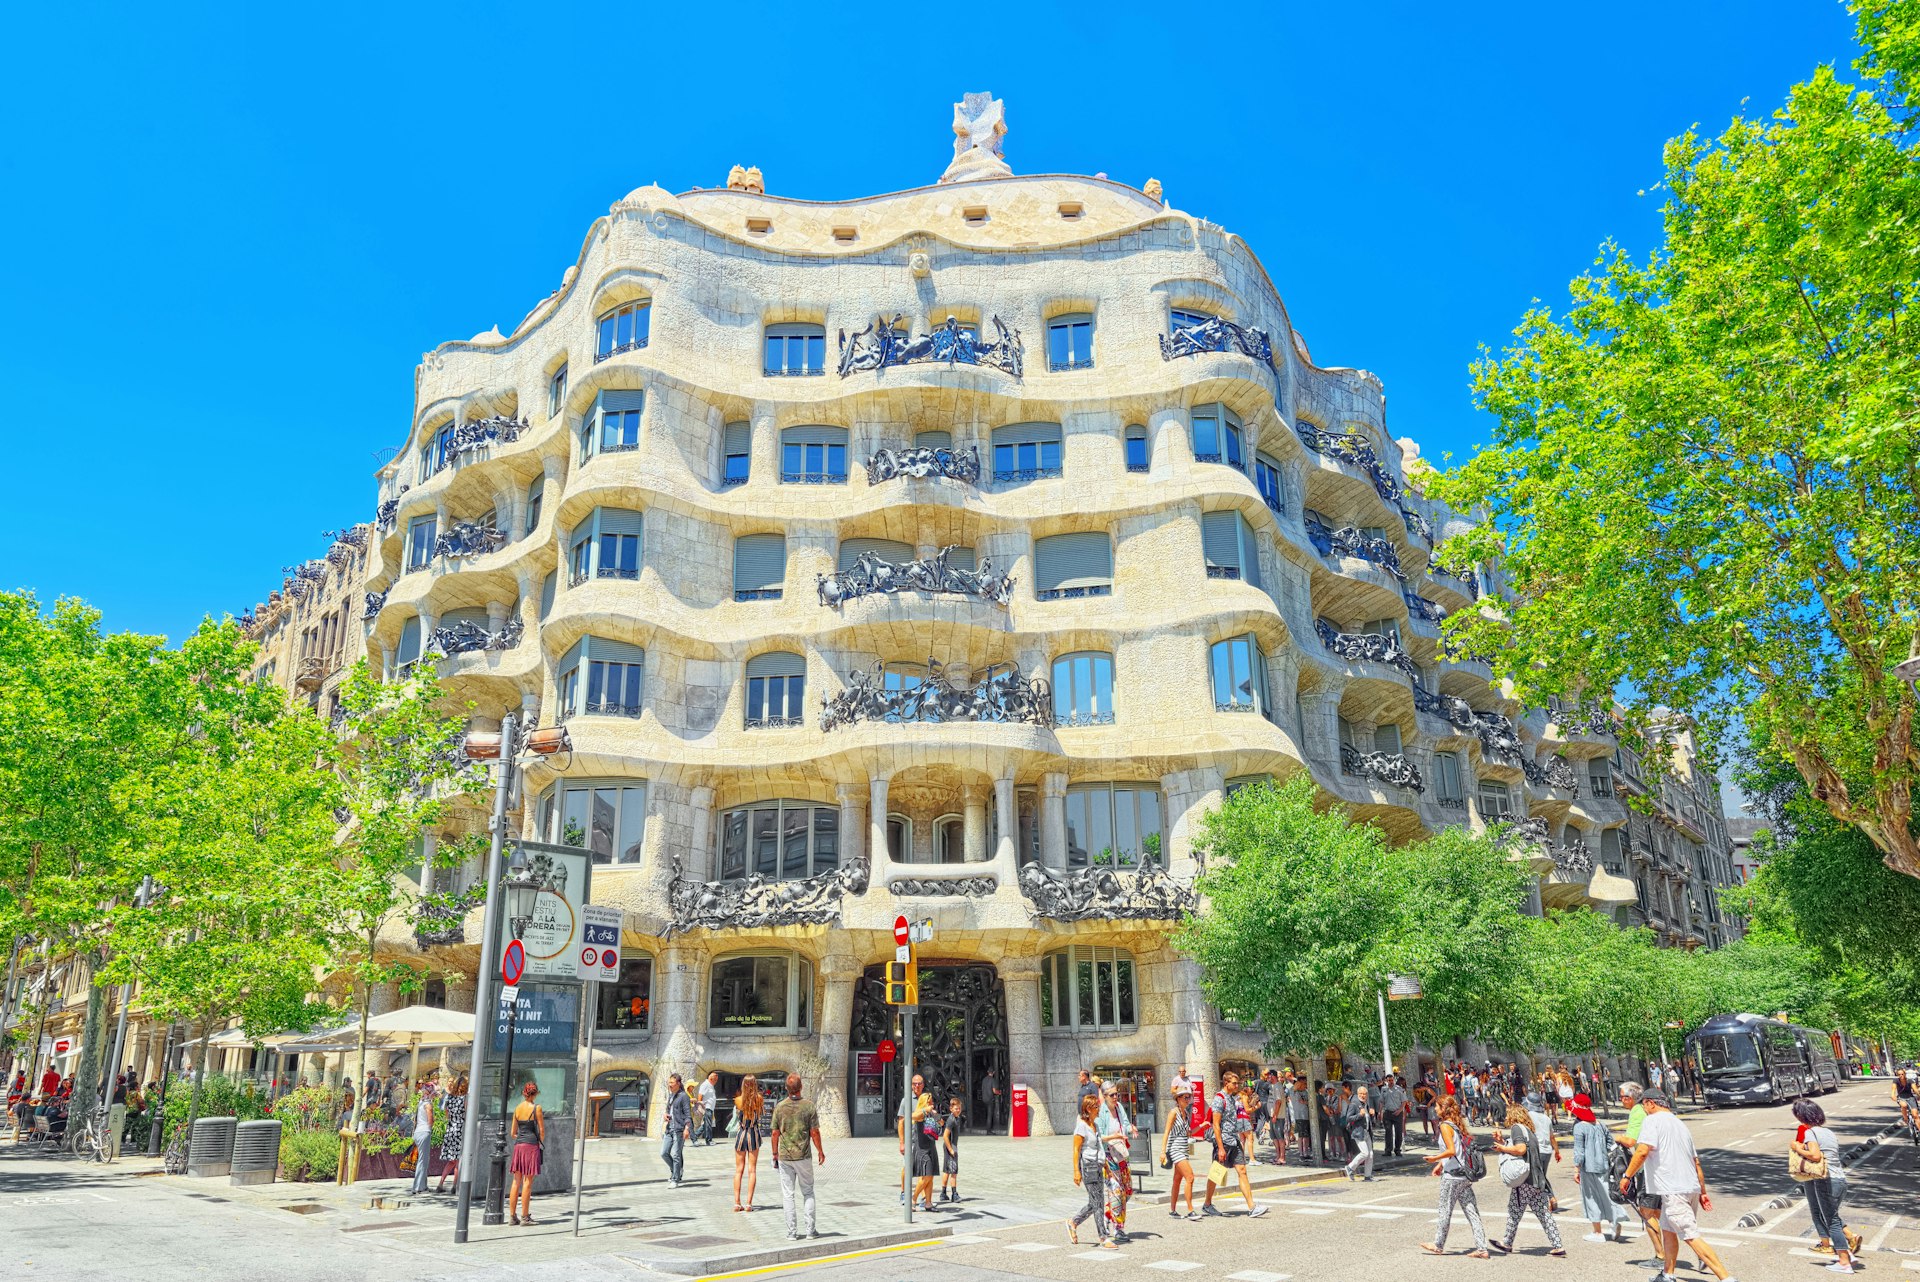 People on the sidewalk in from of Casa Mila, popularly known as La Pedrera, Barcelona, Catalonia, Spain